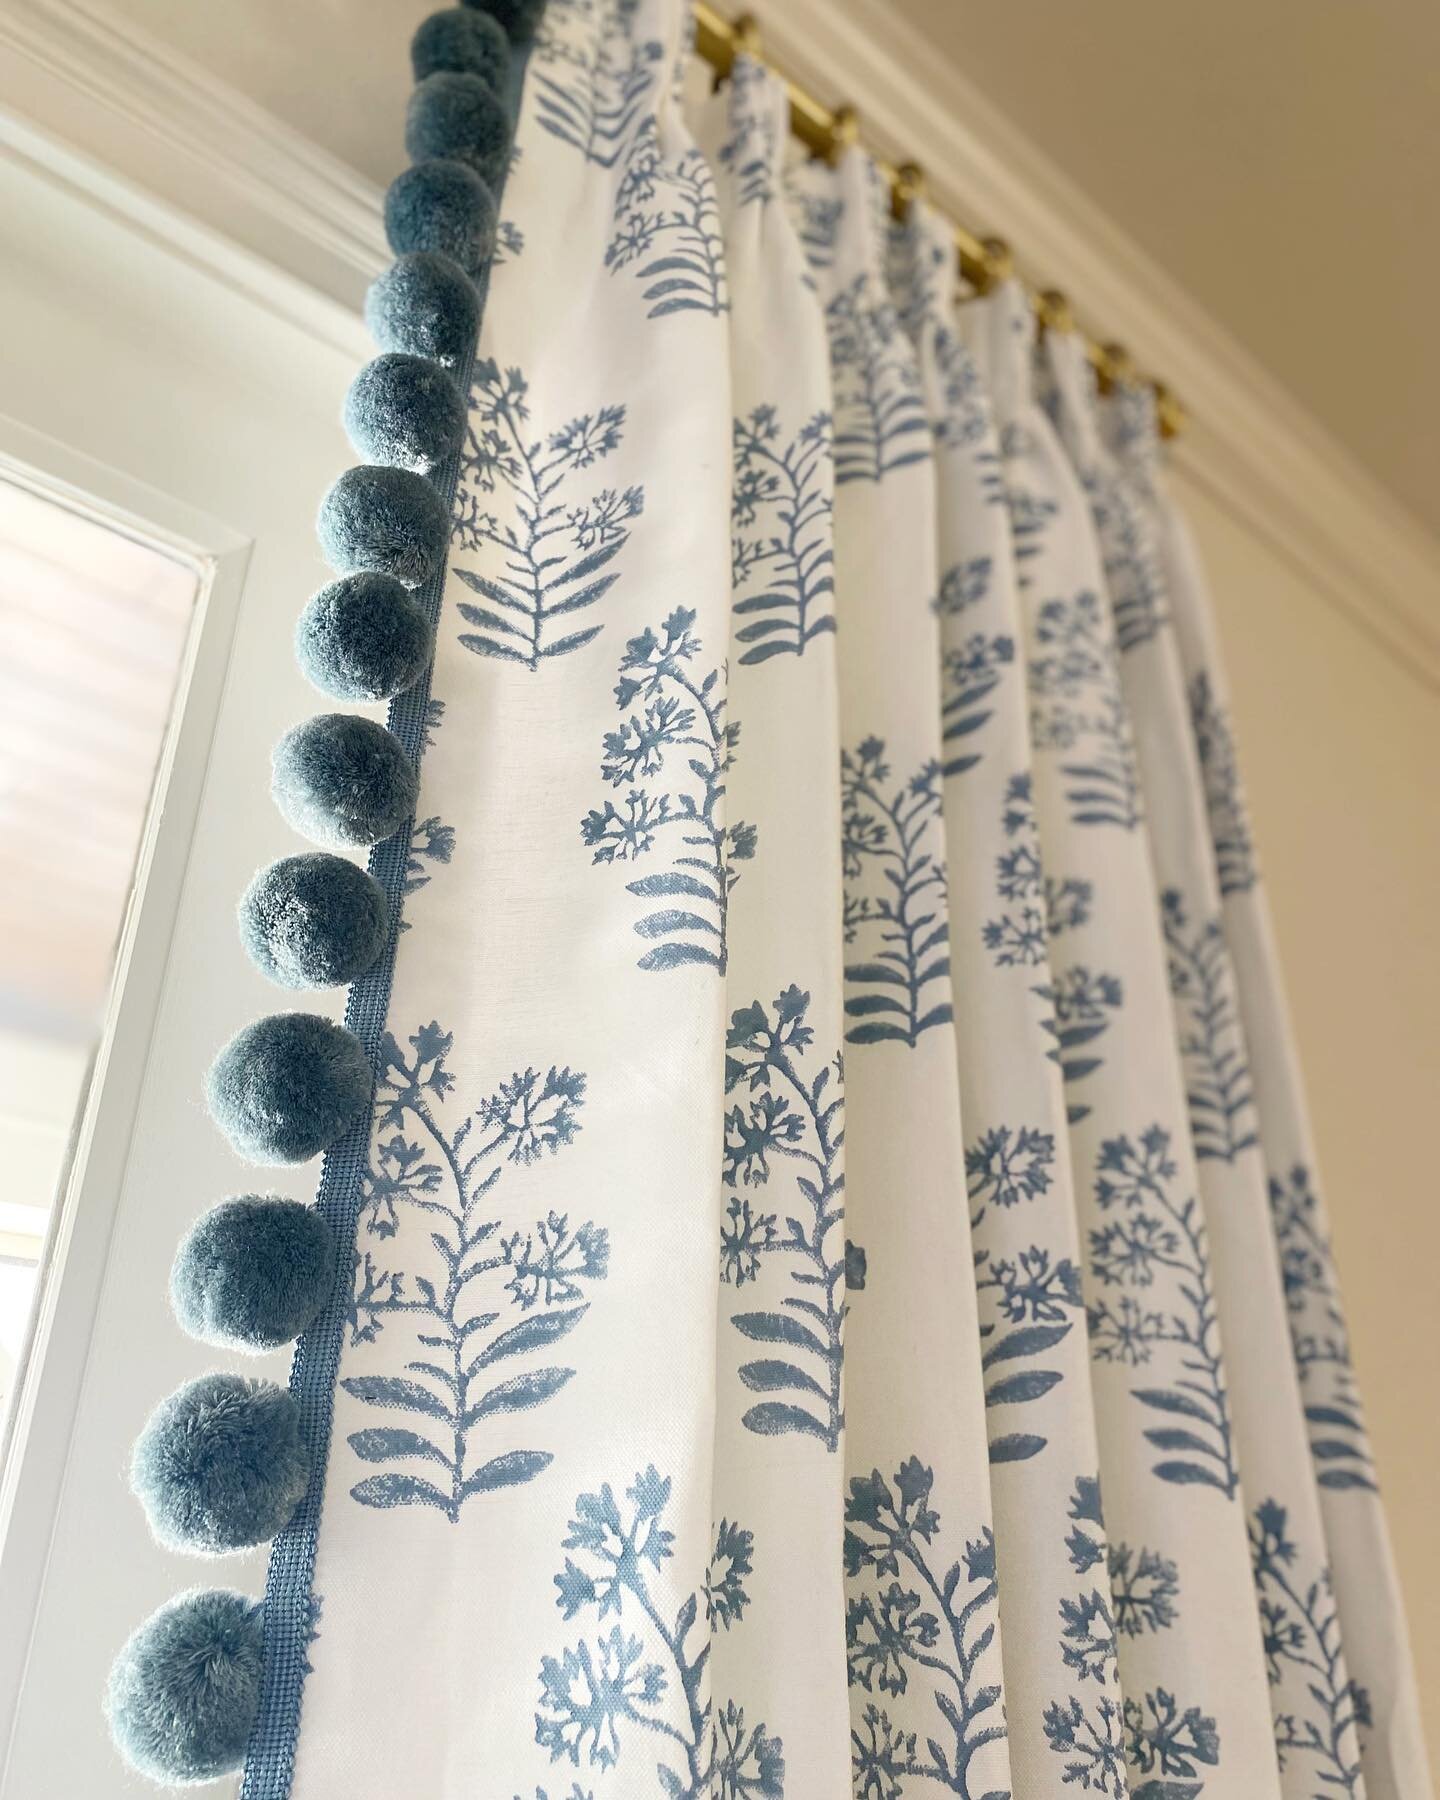 Draperies, Draperies, Draperies. Custom window treatments all over our winter park remodel and we aren&rsquo;t mad about it! 💚💙